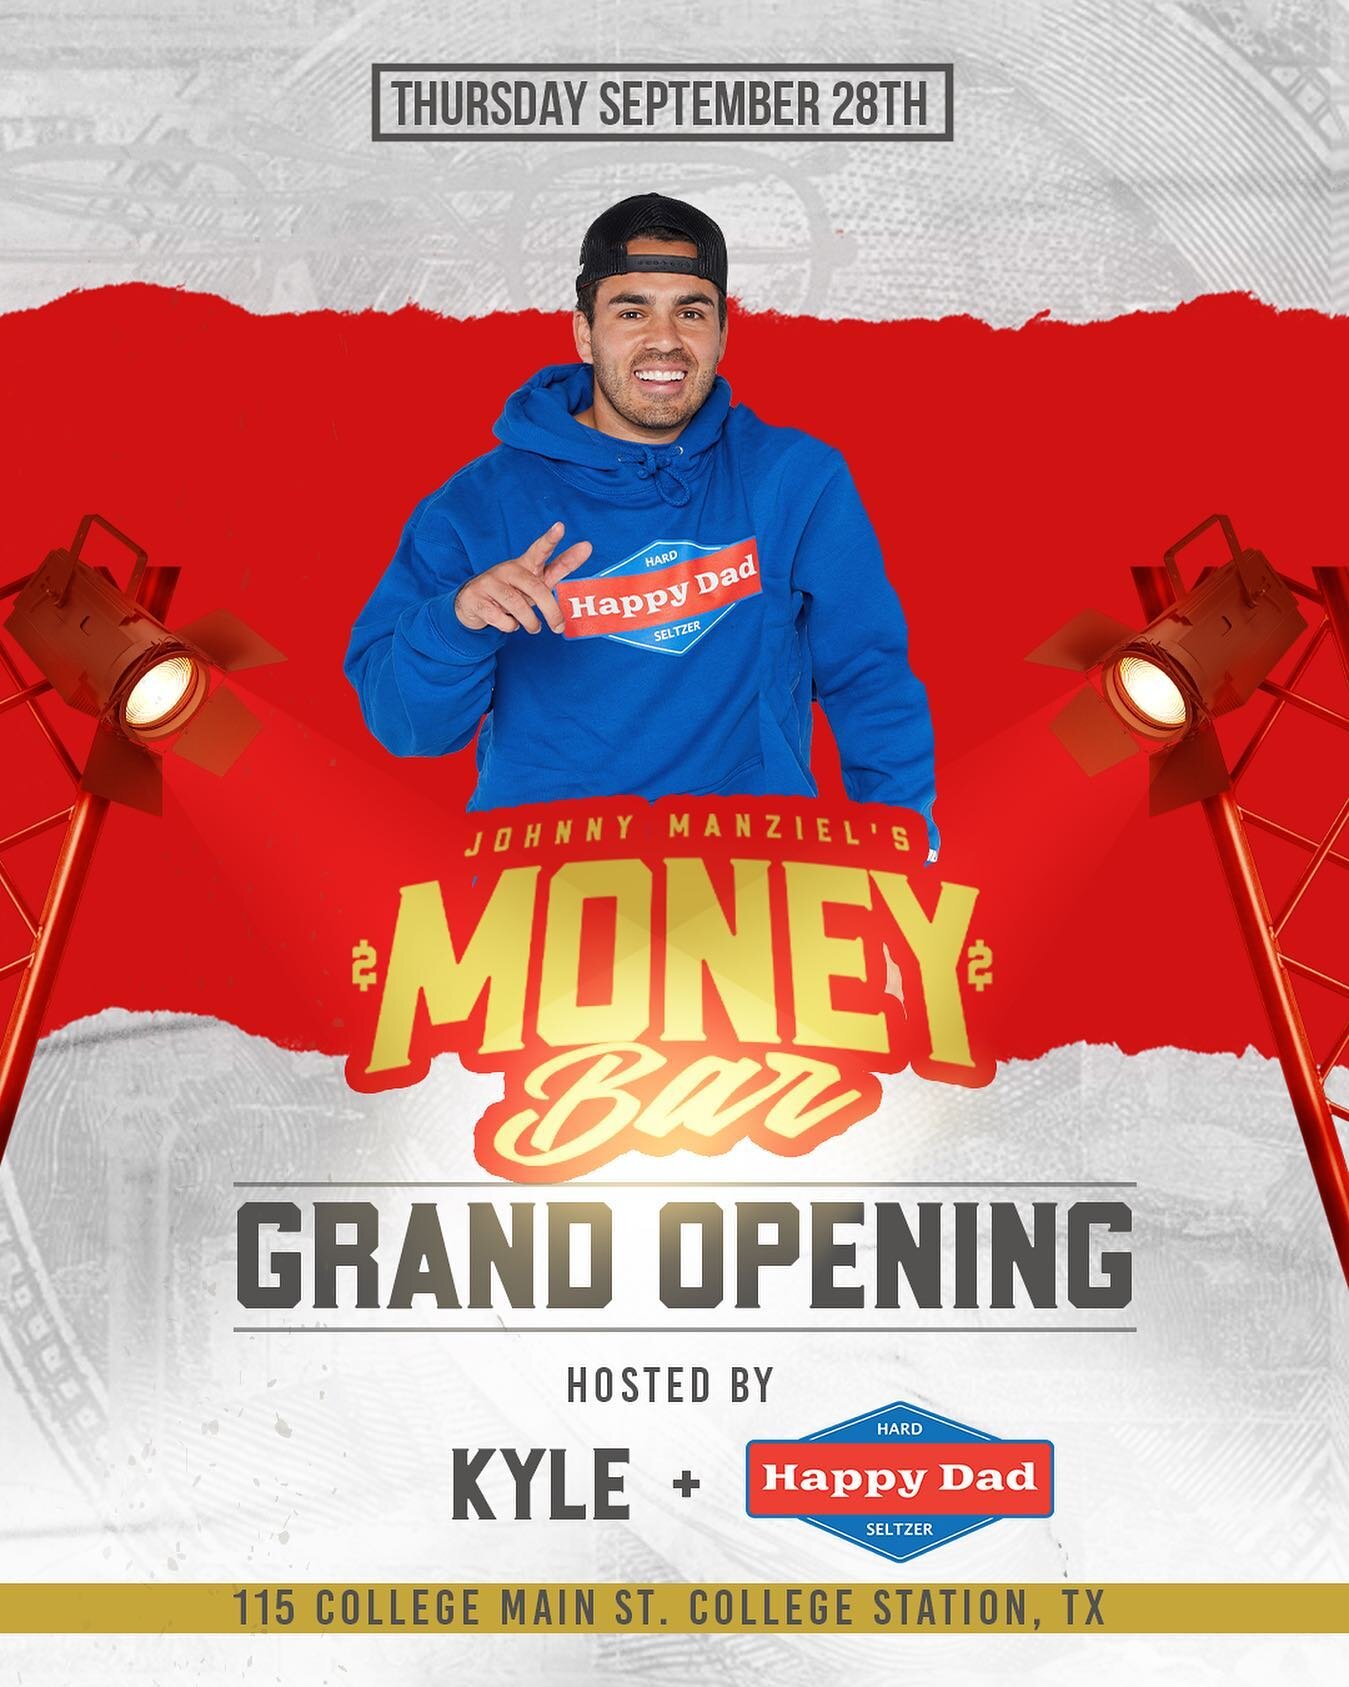 Grand Opening with @kyle and @happydad 🔥 PRE-PARTY starts at 6pm today!